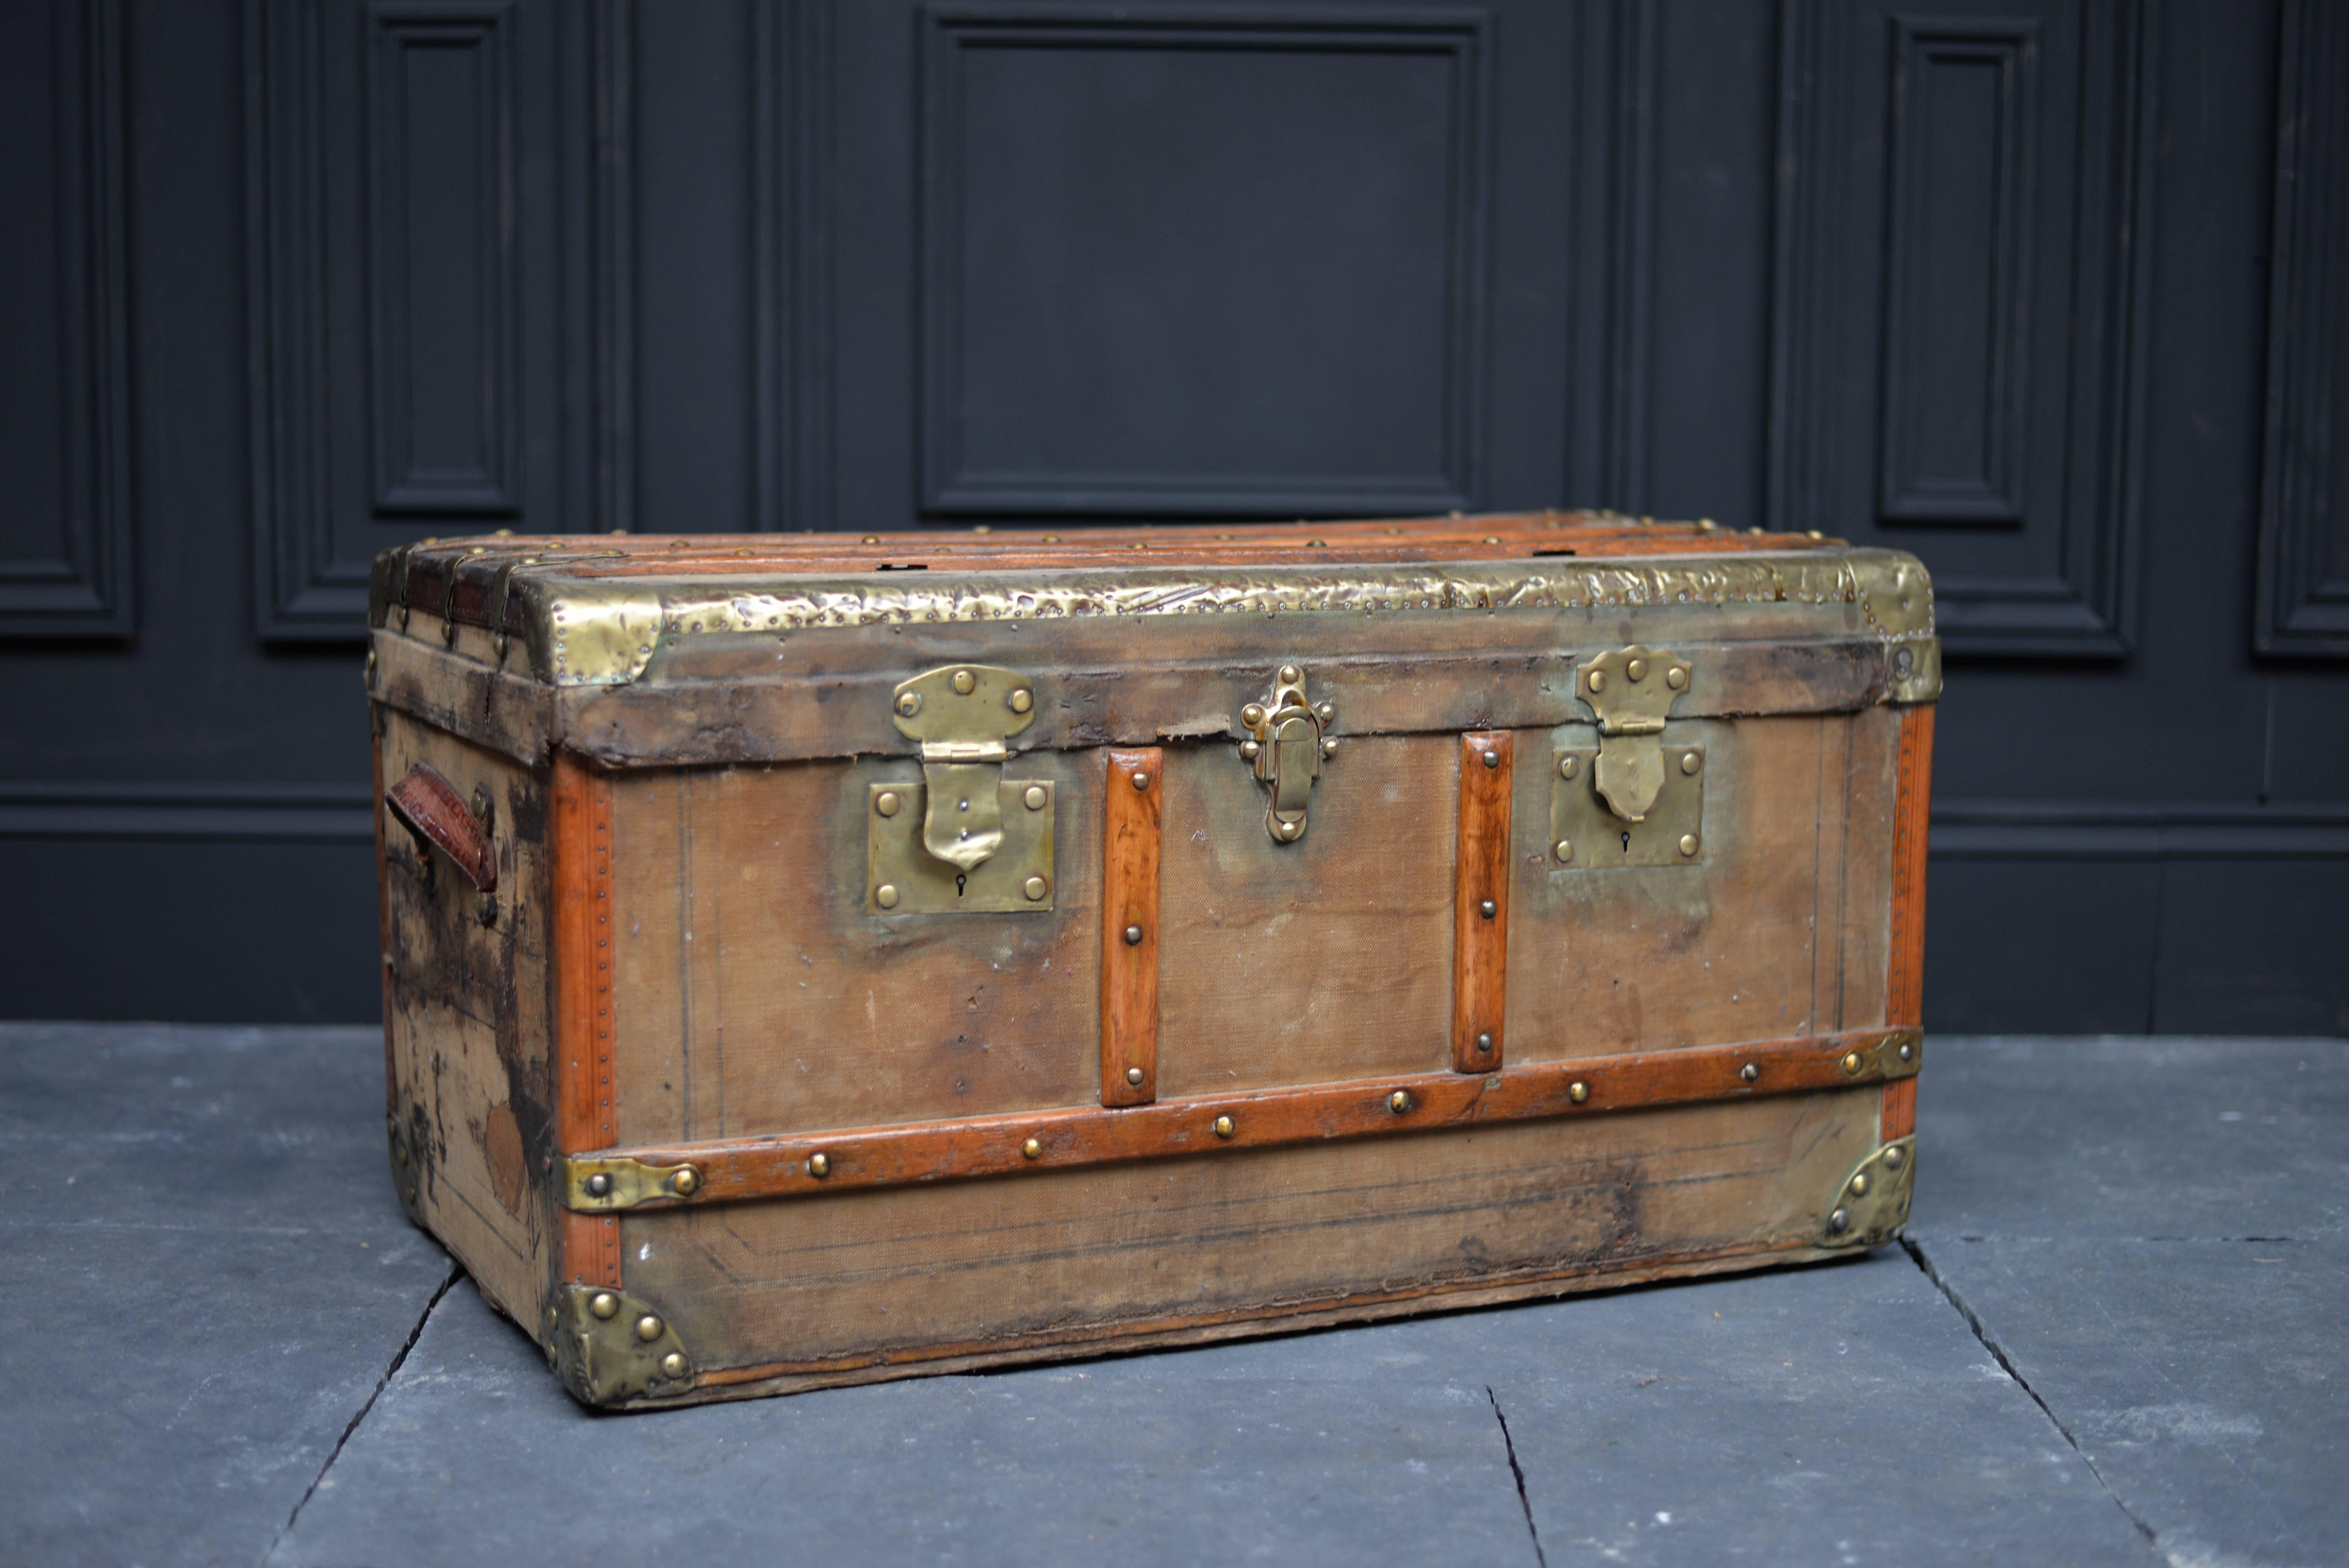 If shipped to the US or EU, no import tax applies.  

This ornate trunk was made in France at the beginning of the 19th century. Decorated with rosewood rods, brass studs and railings, it features a triple locking mechanism and sturdy leather